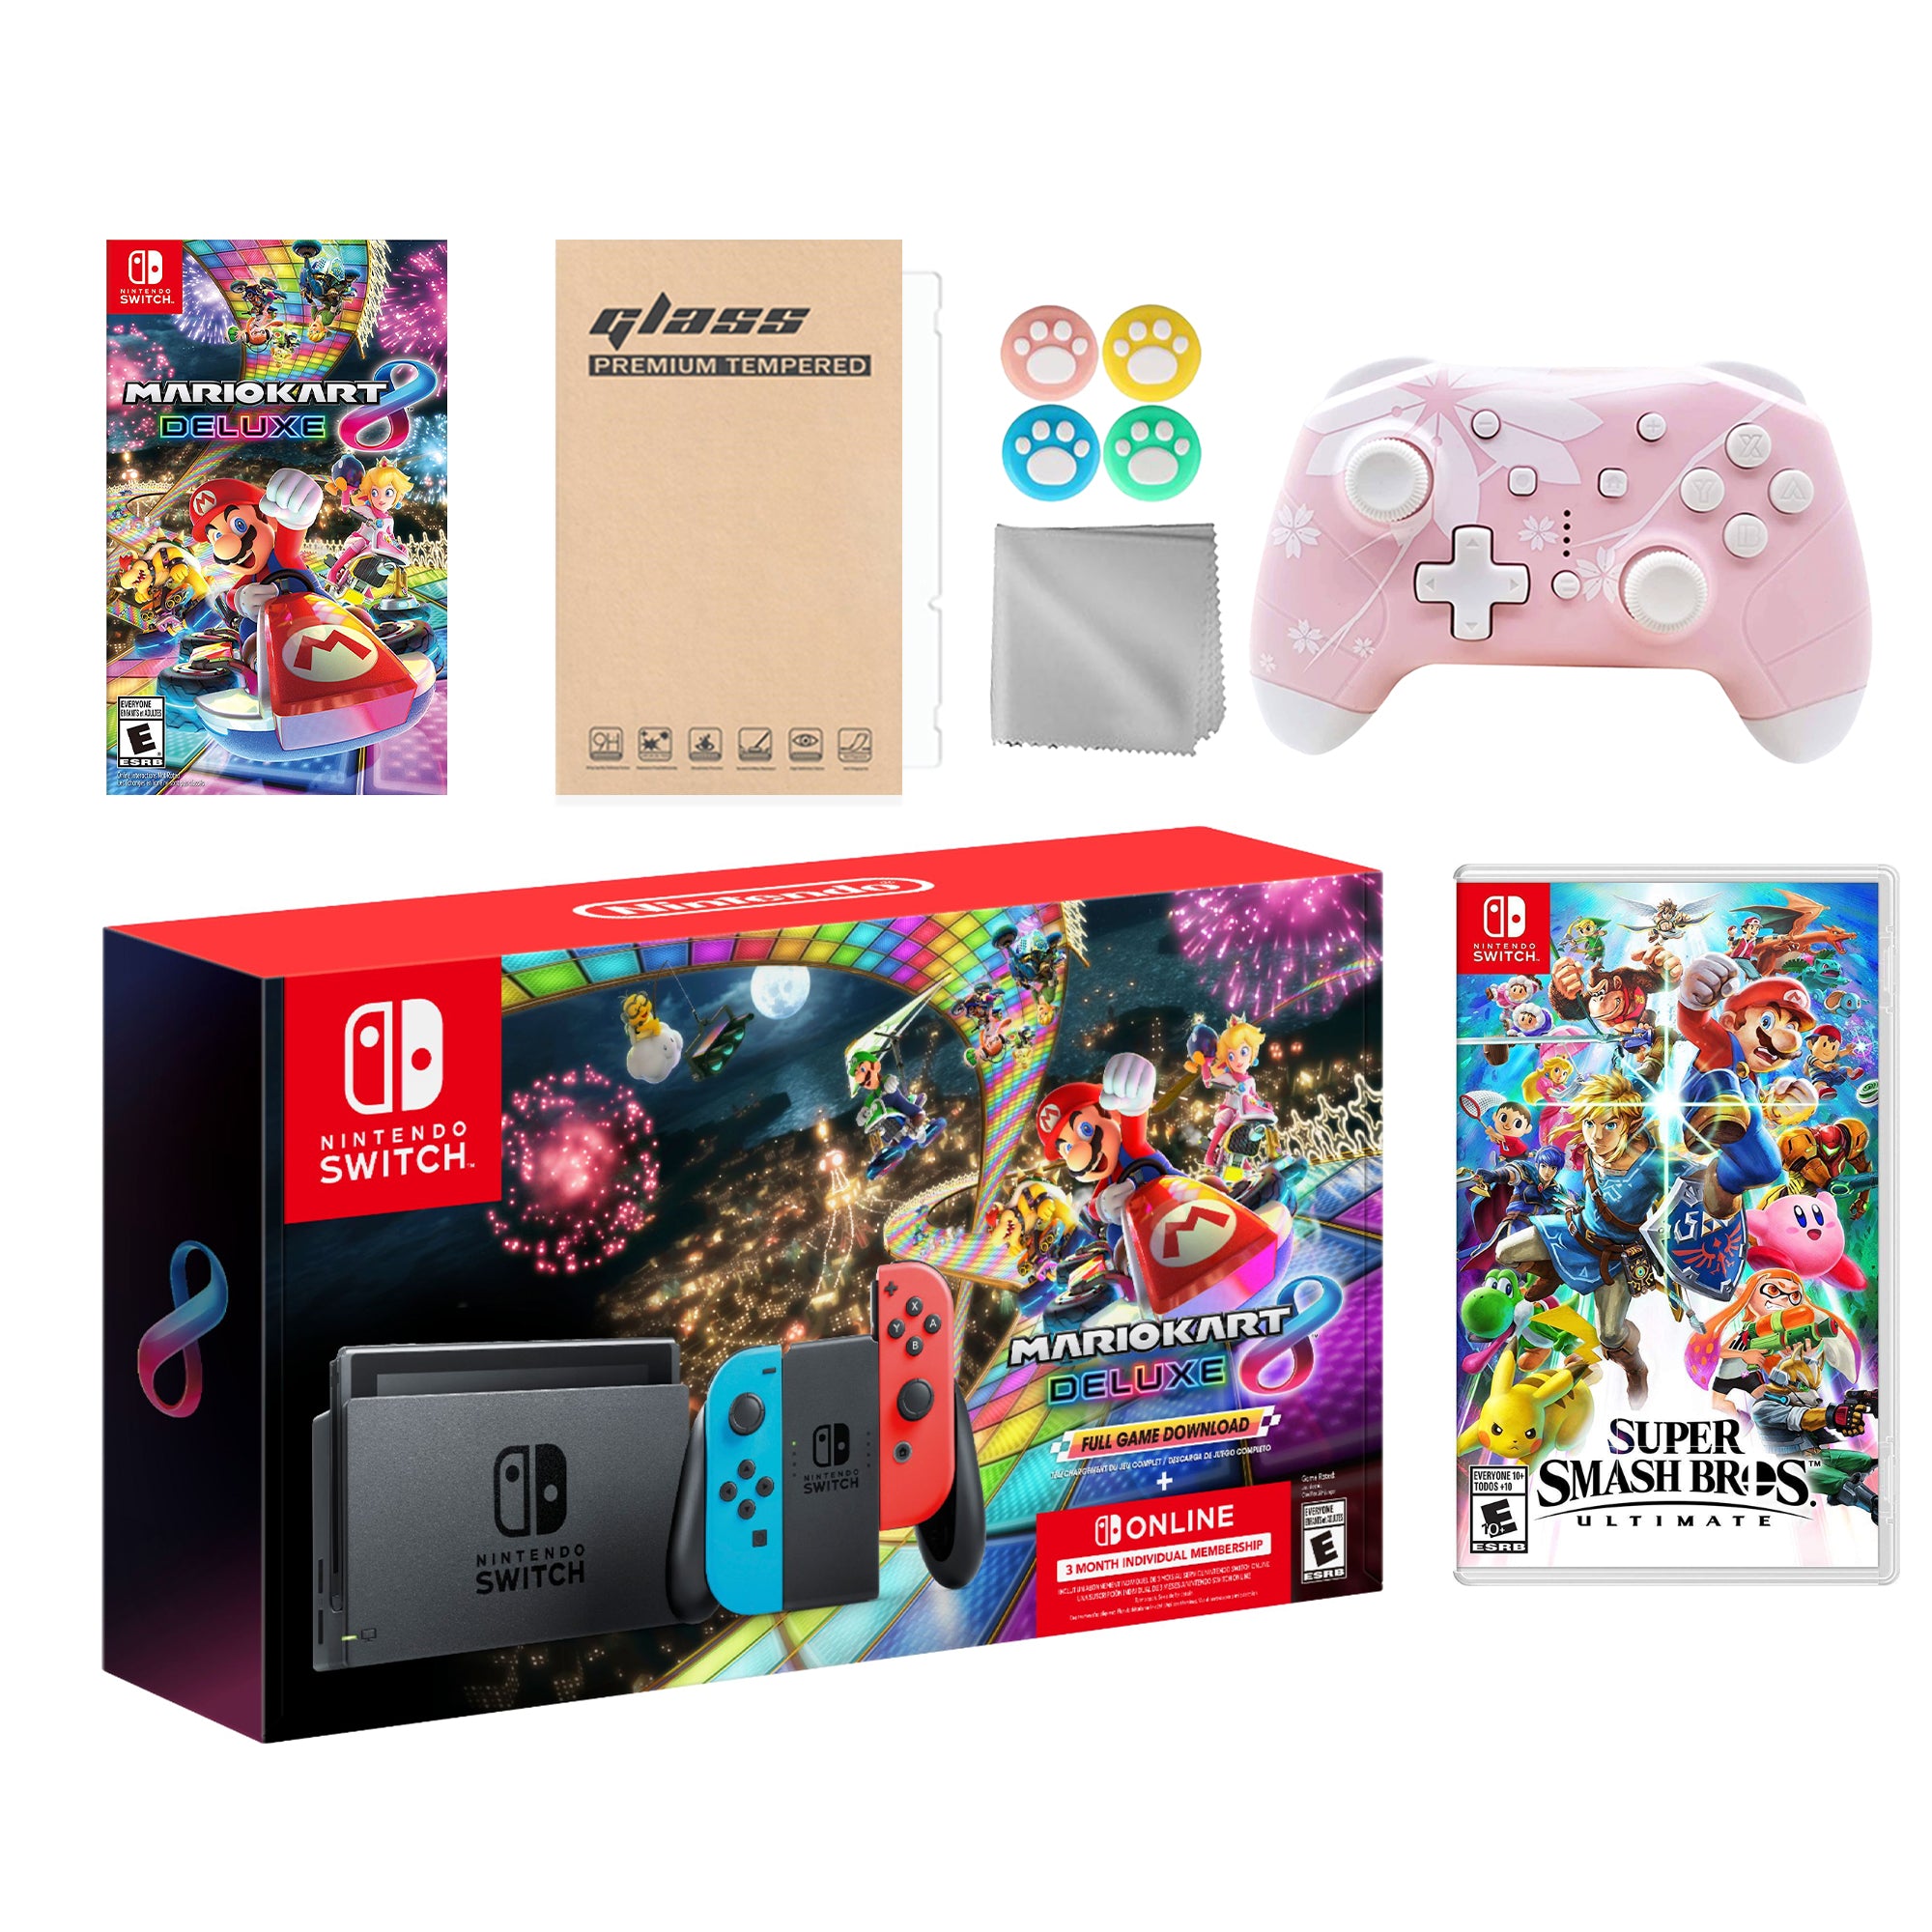 Nintendo Switch Mario Kart 8 Deluxe Bundle: Red Blue Console, Mario Kart 8 & Membership, Super Smash Bros. Ultimate, Mytrix Wireless Pro Controller Pink Cherry Blossom and Accessories